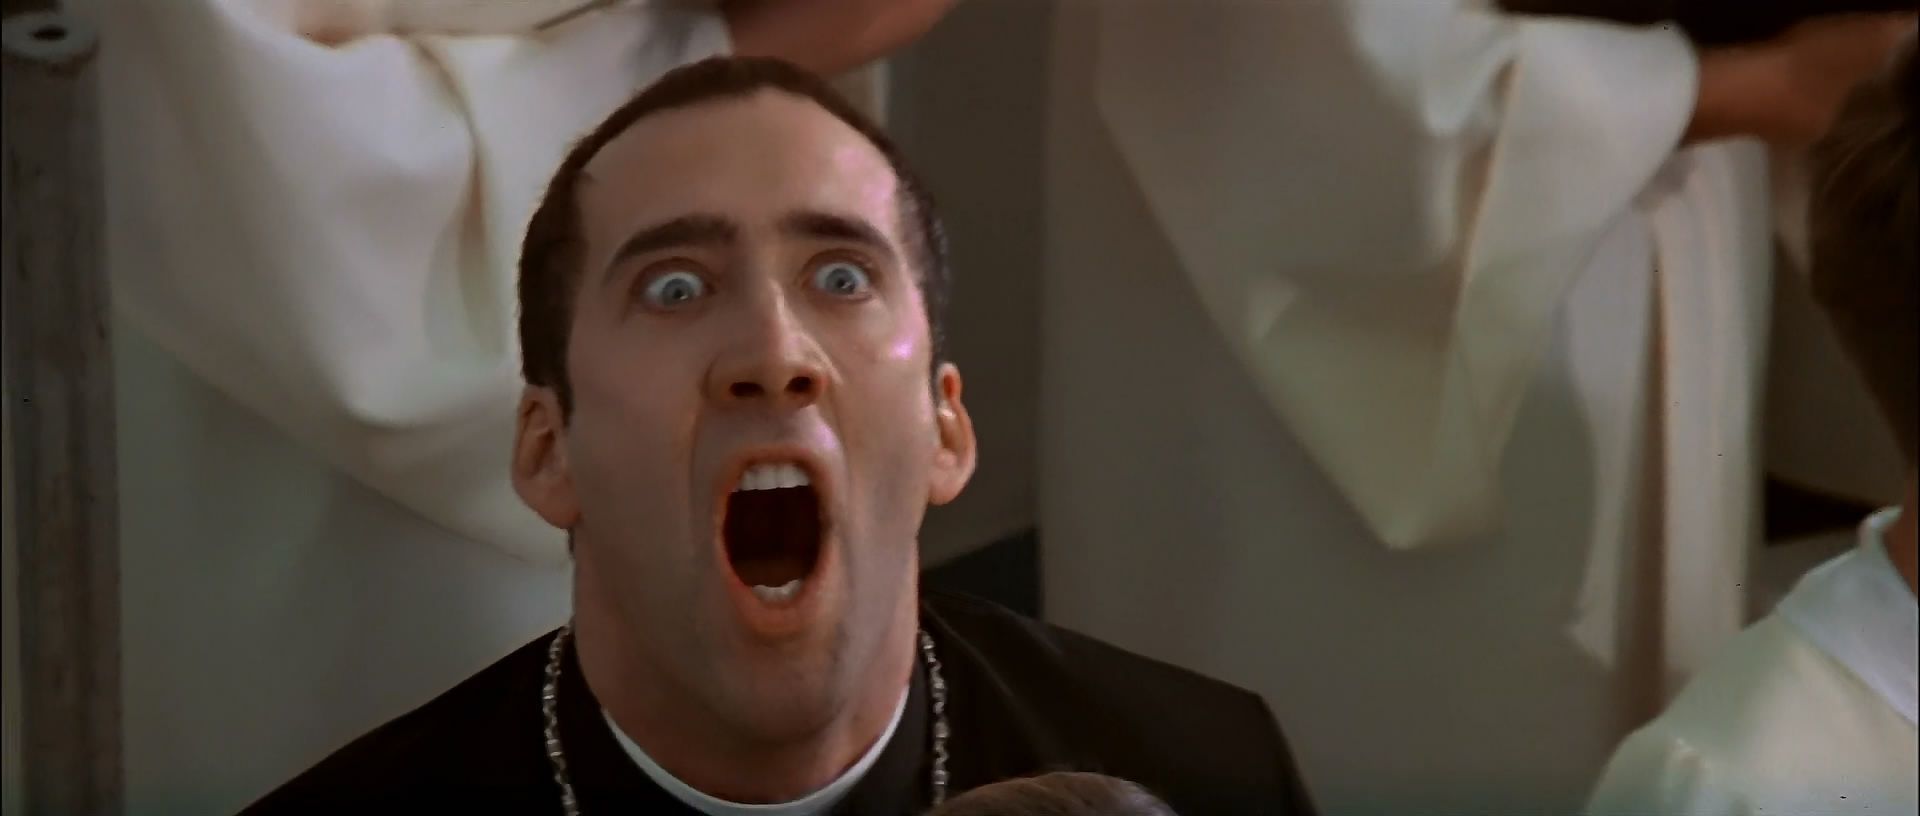 14 Nicolas Cage HD Wallpapers Backgrounds - Wallpaper Abyss